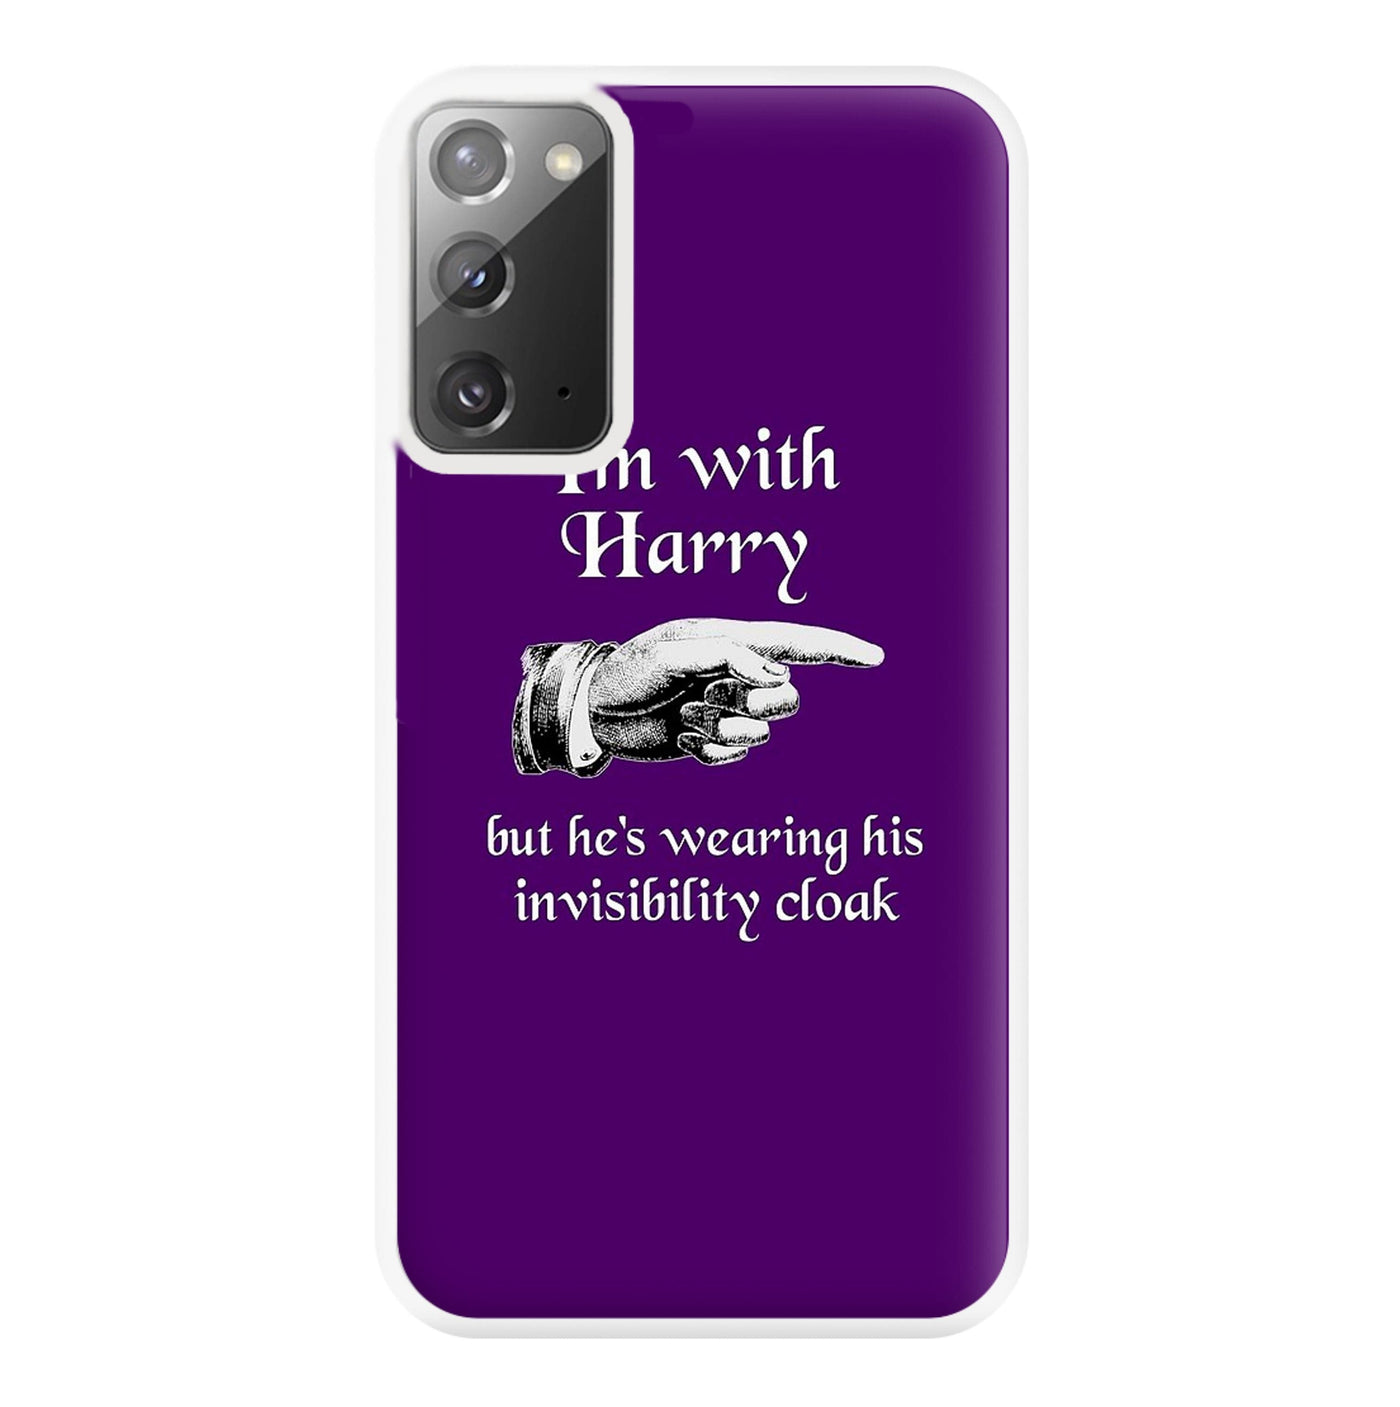 I'm With Harry - Harry Potter Phone Case